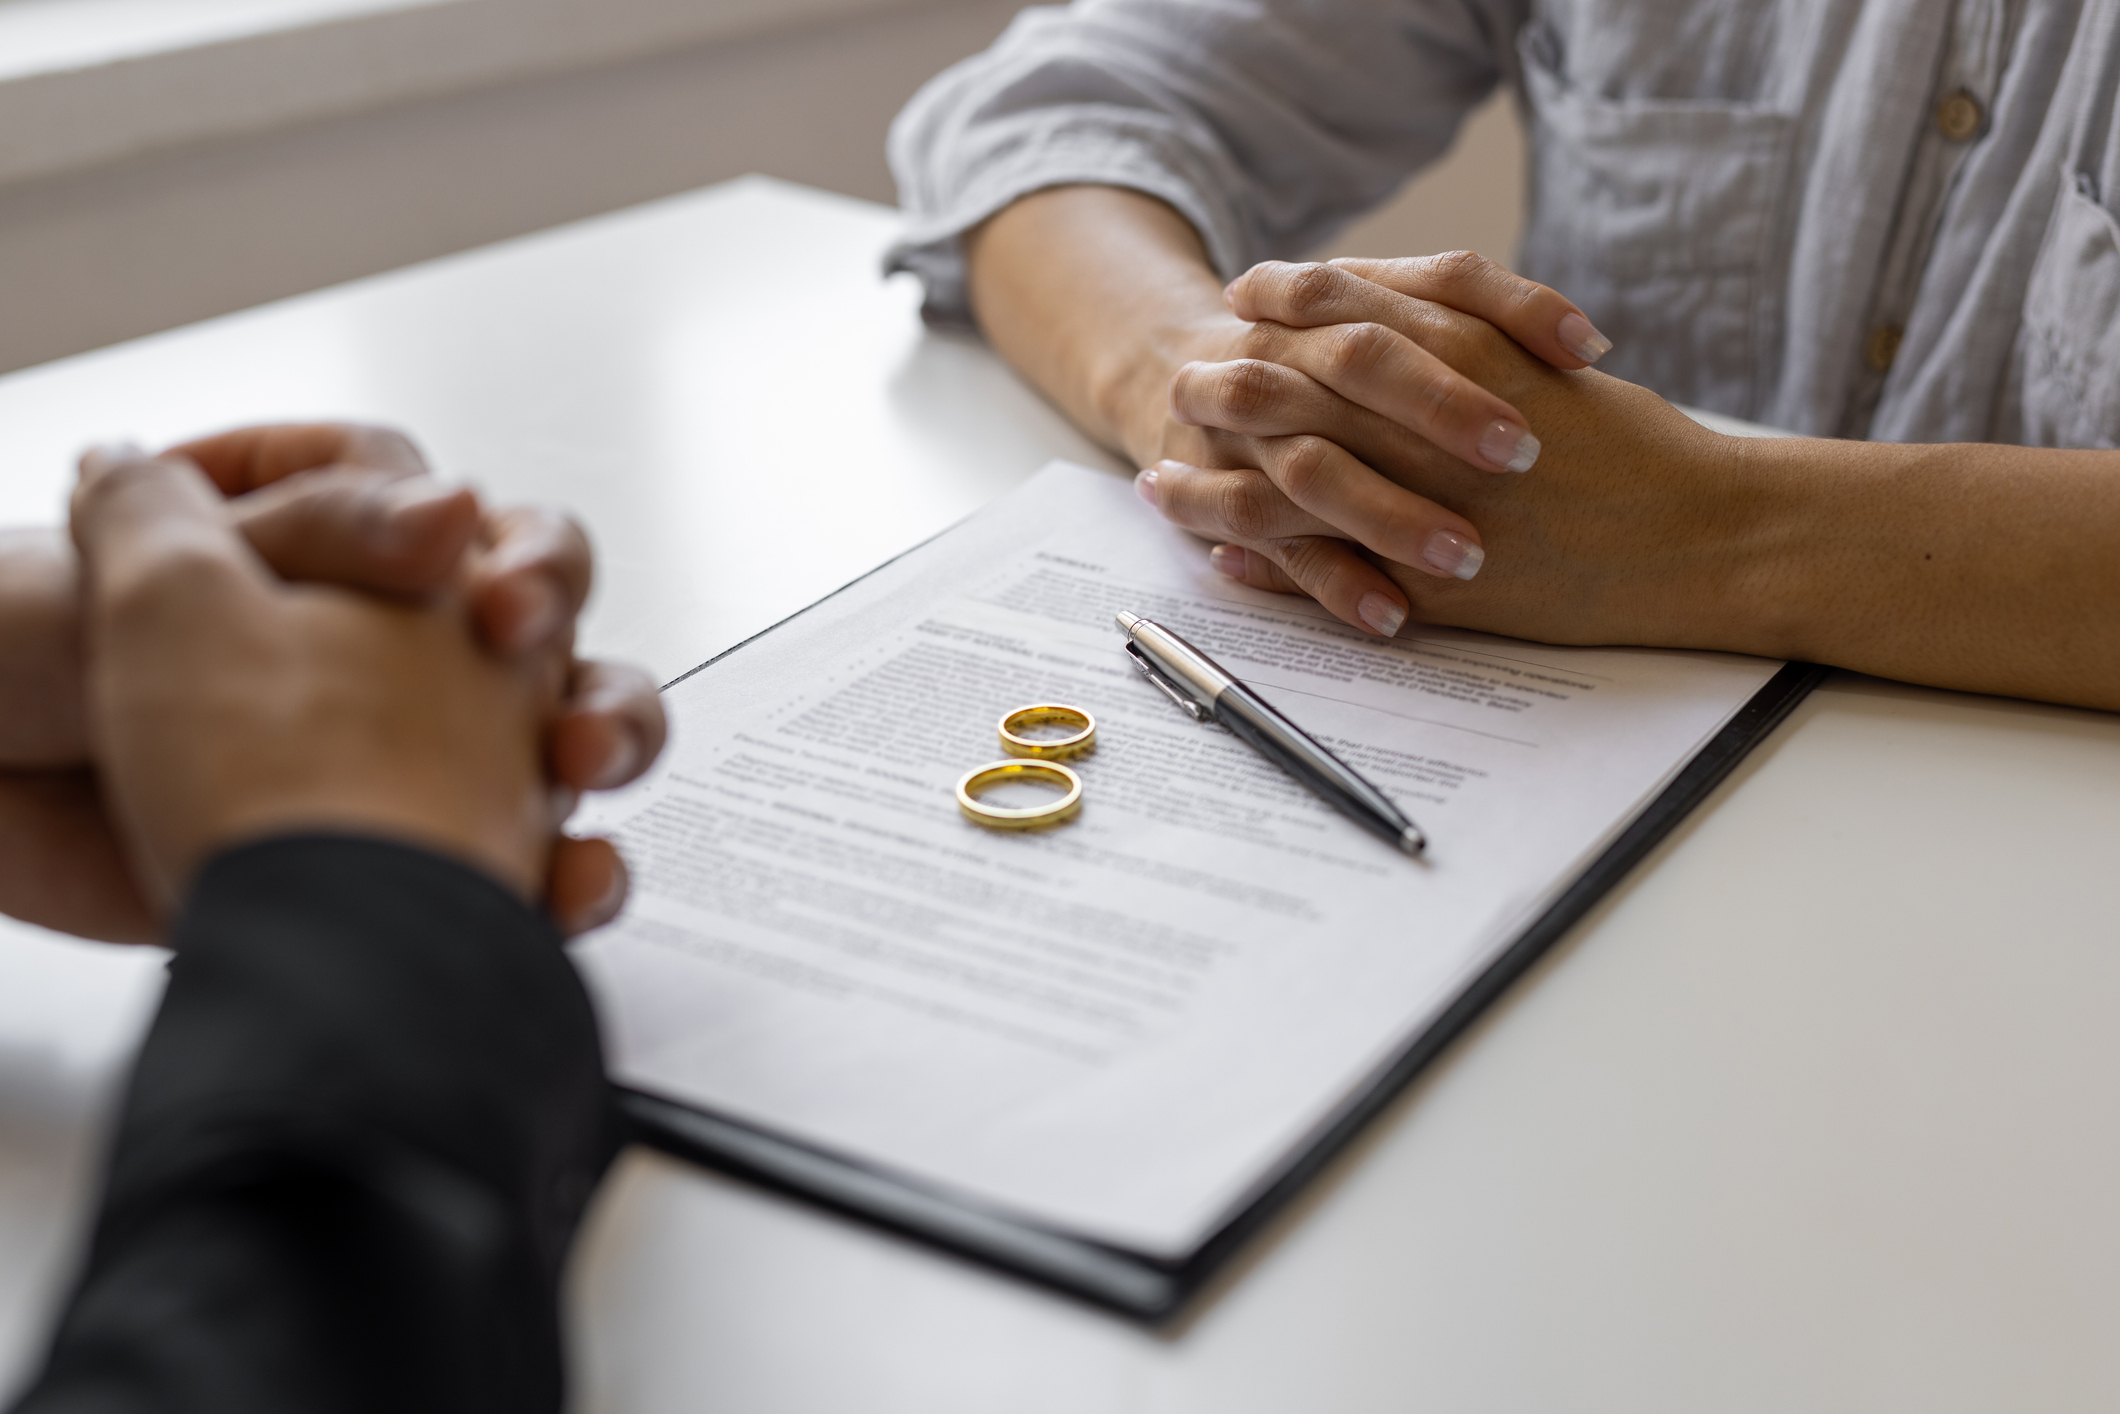 Two people holding hands over a table with wedding rings and documents, suggesting partnership or marriage